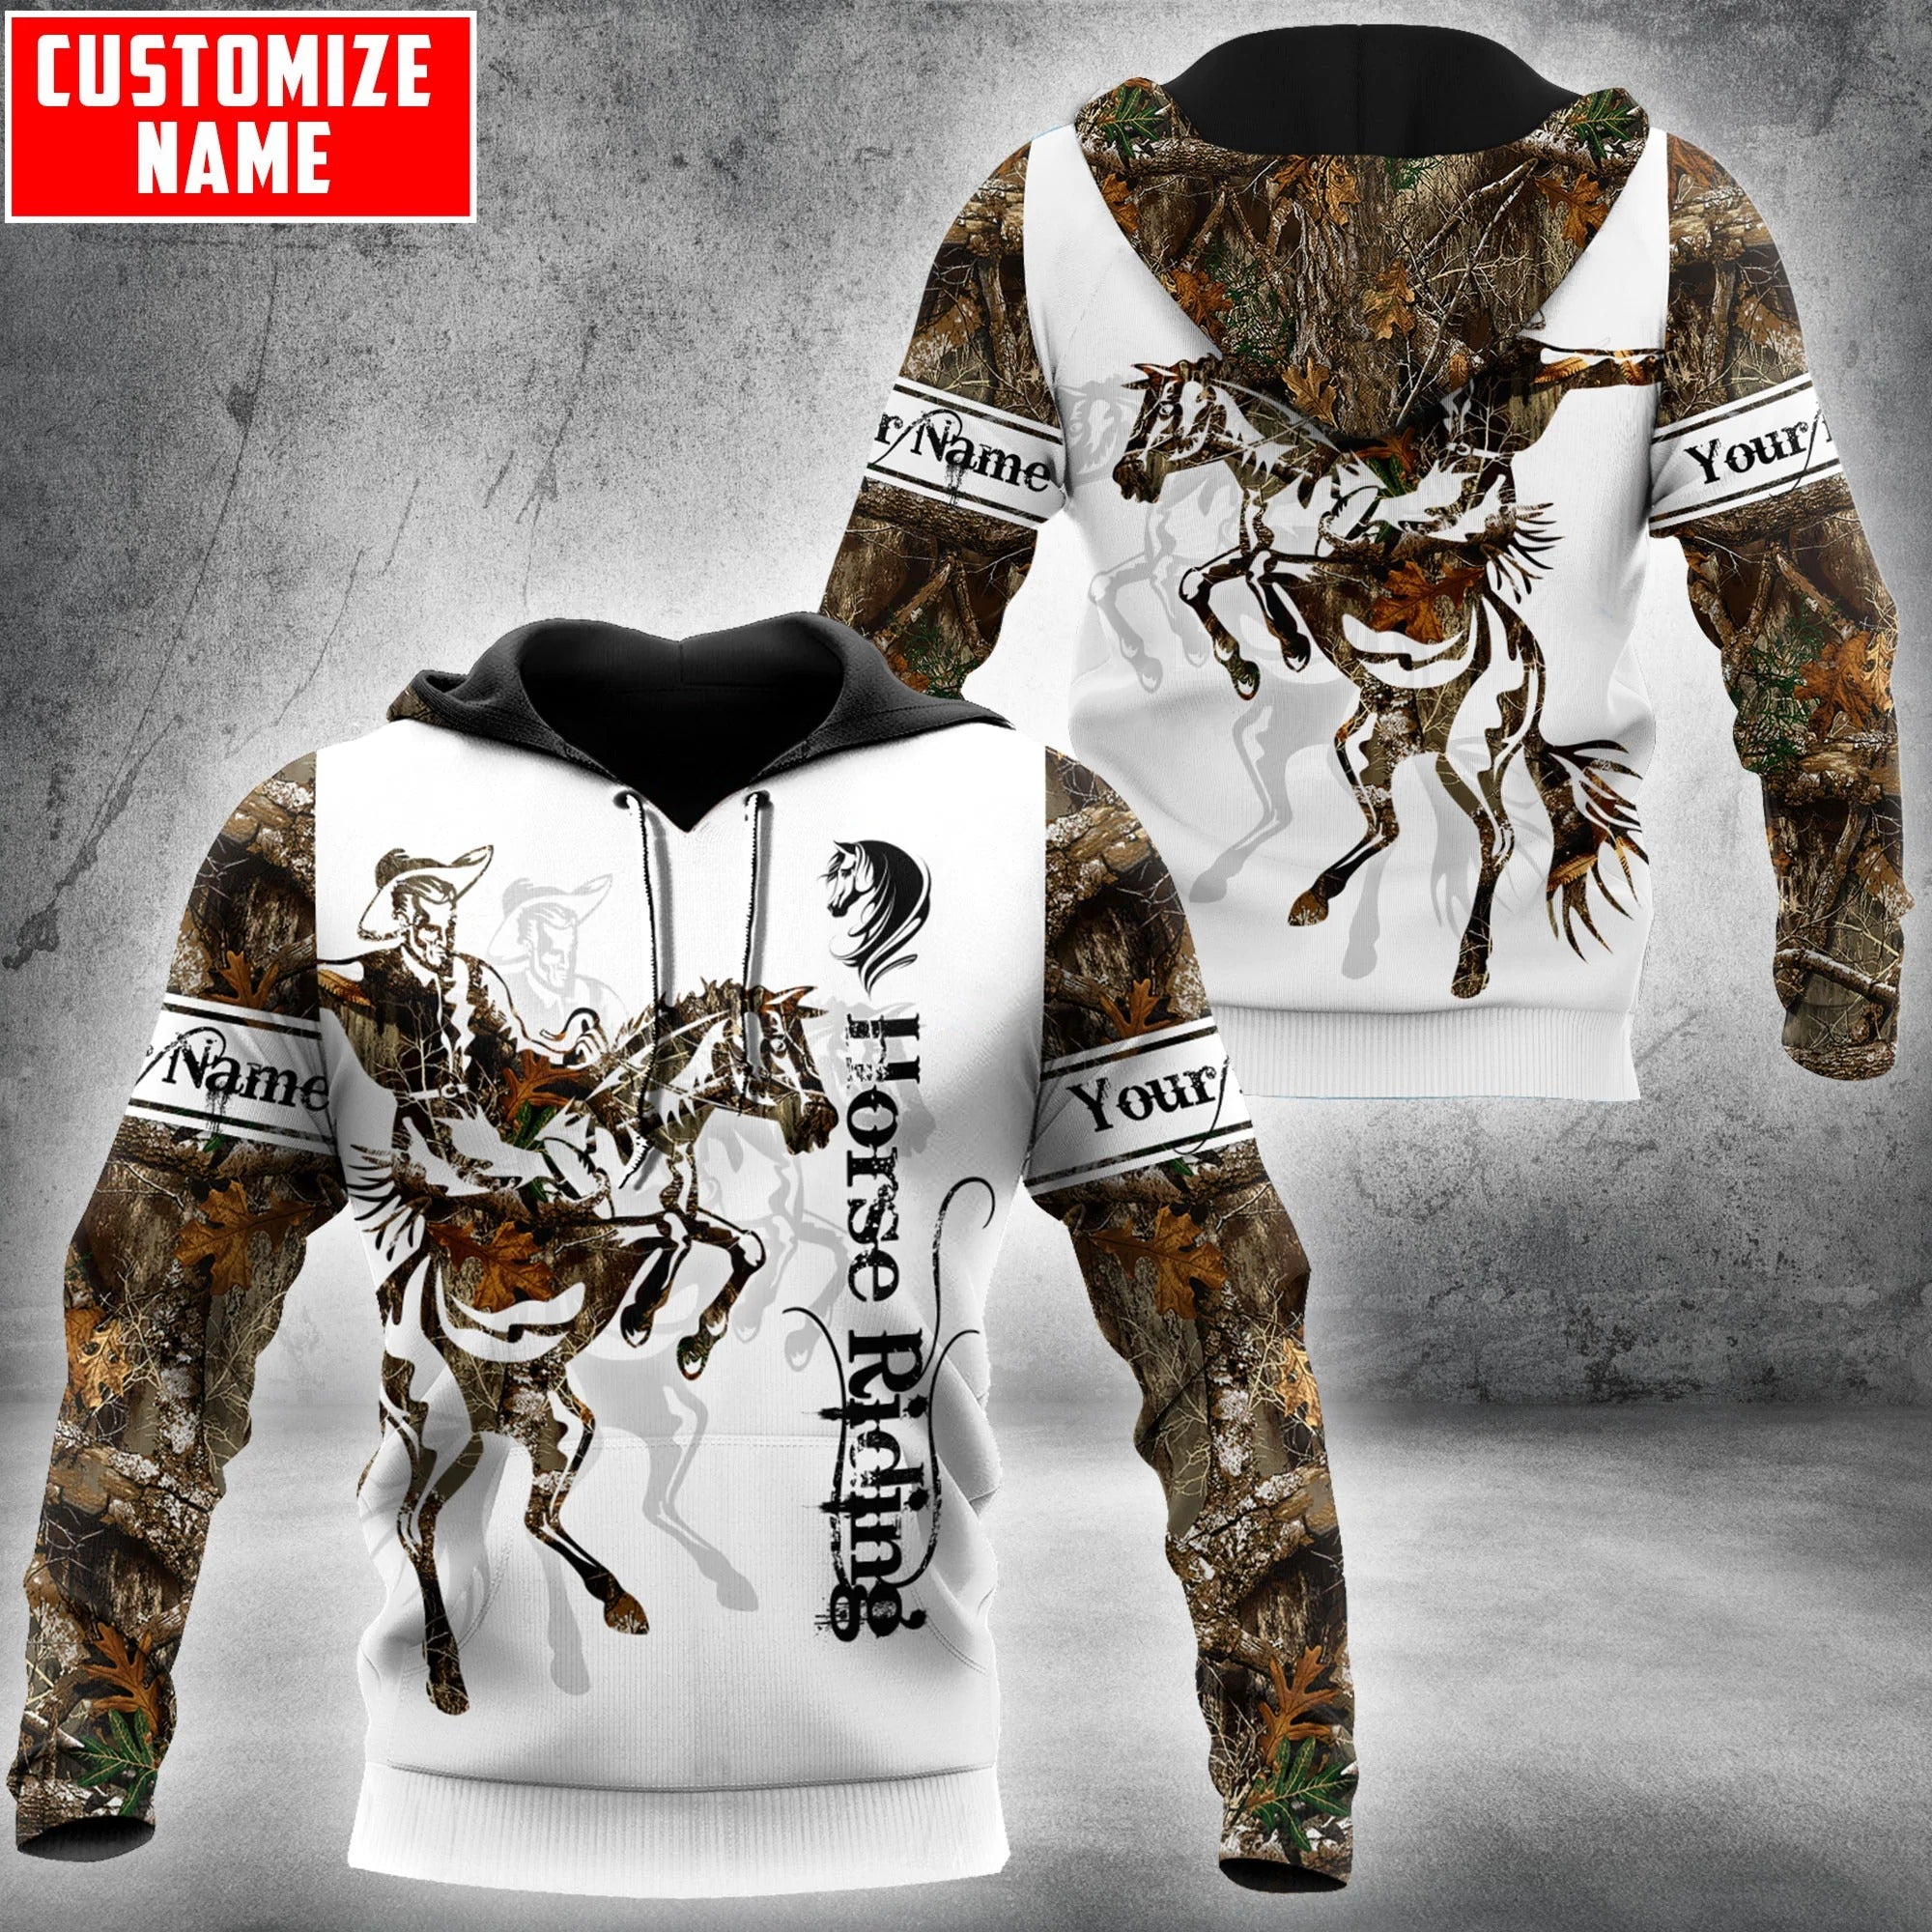 3D All Over Print Horse Riding Hoodie For Him Her/ Horse Hoodie For Dad Uncle